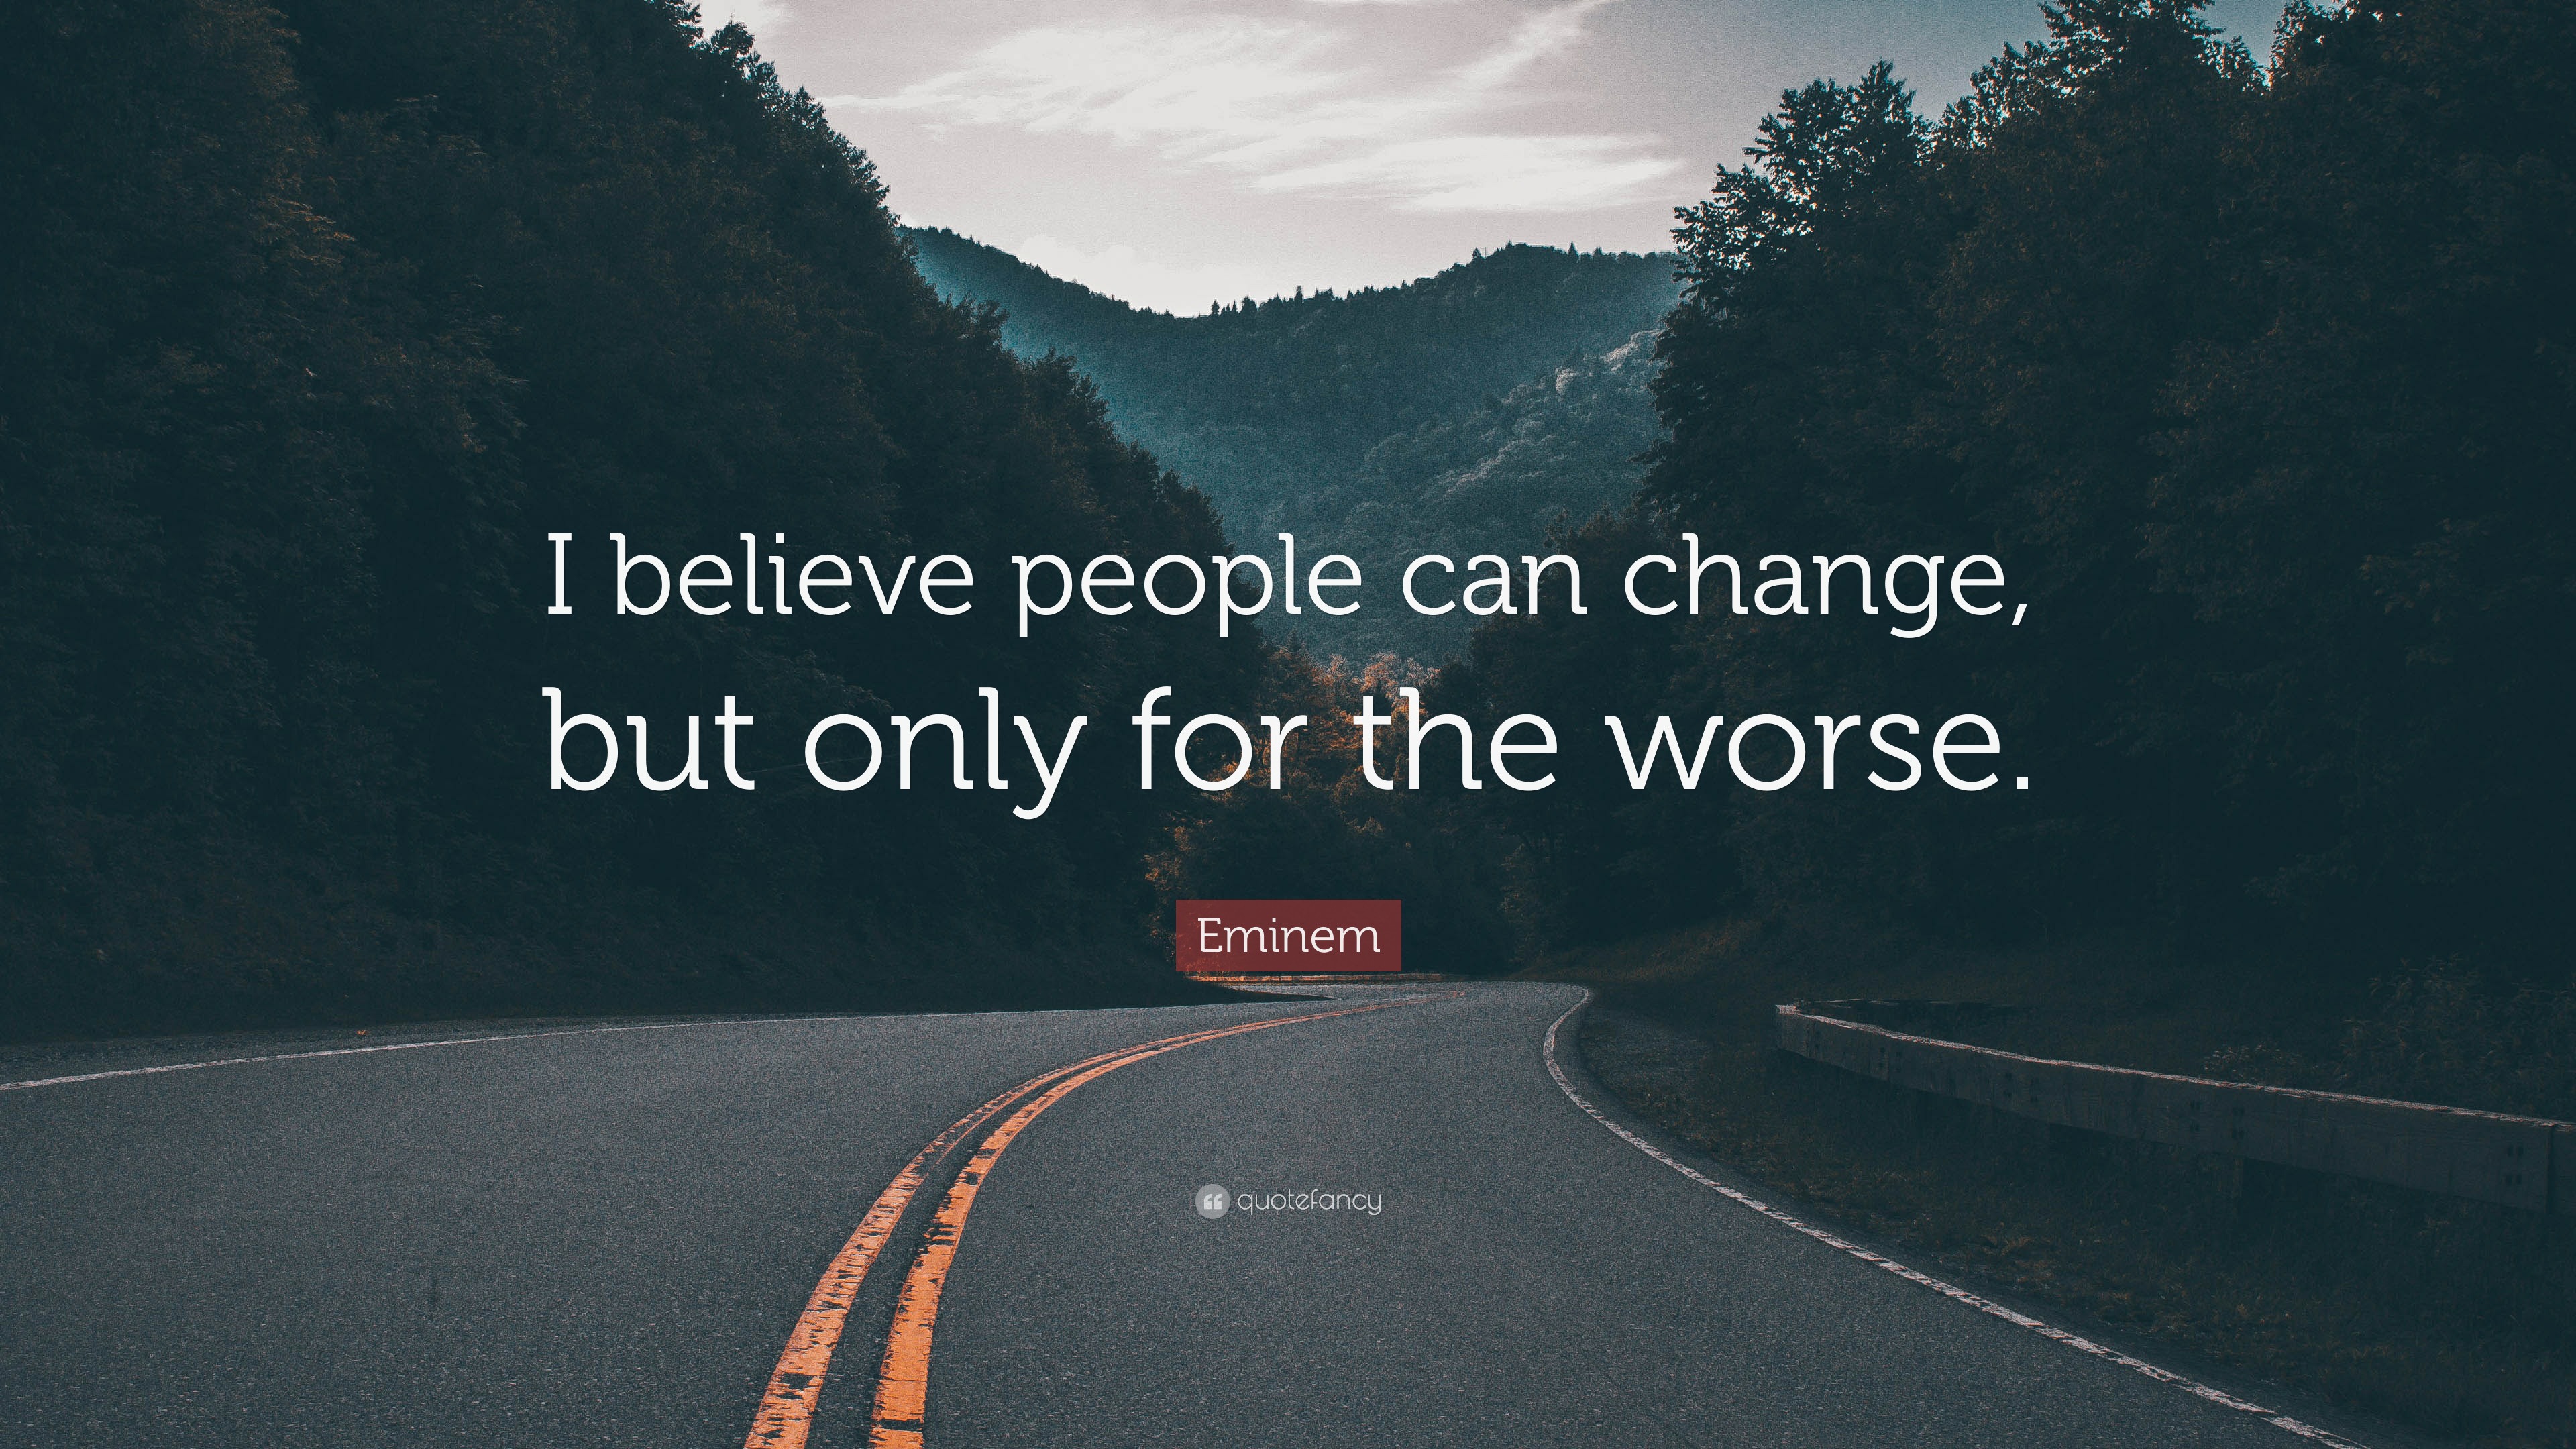 Eminem Quote: “I believe people can change, but only for the worse.”